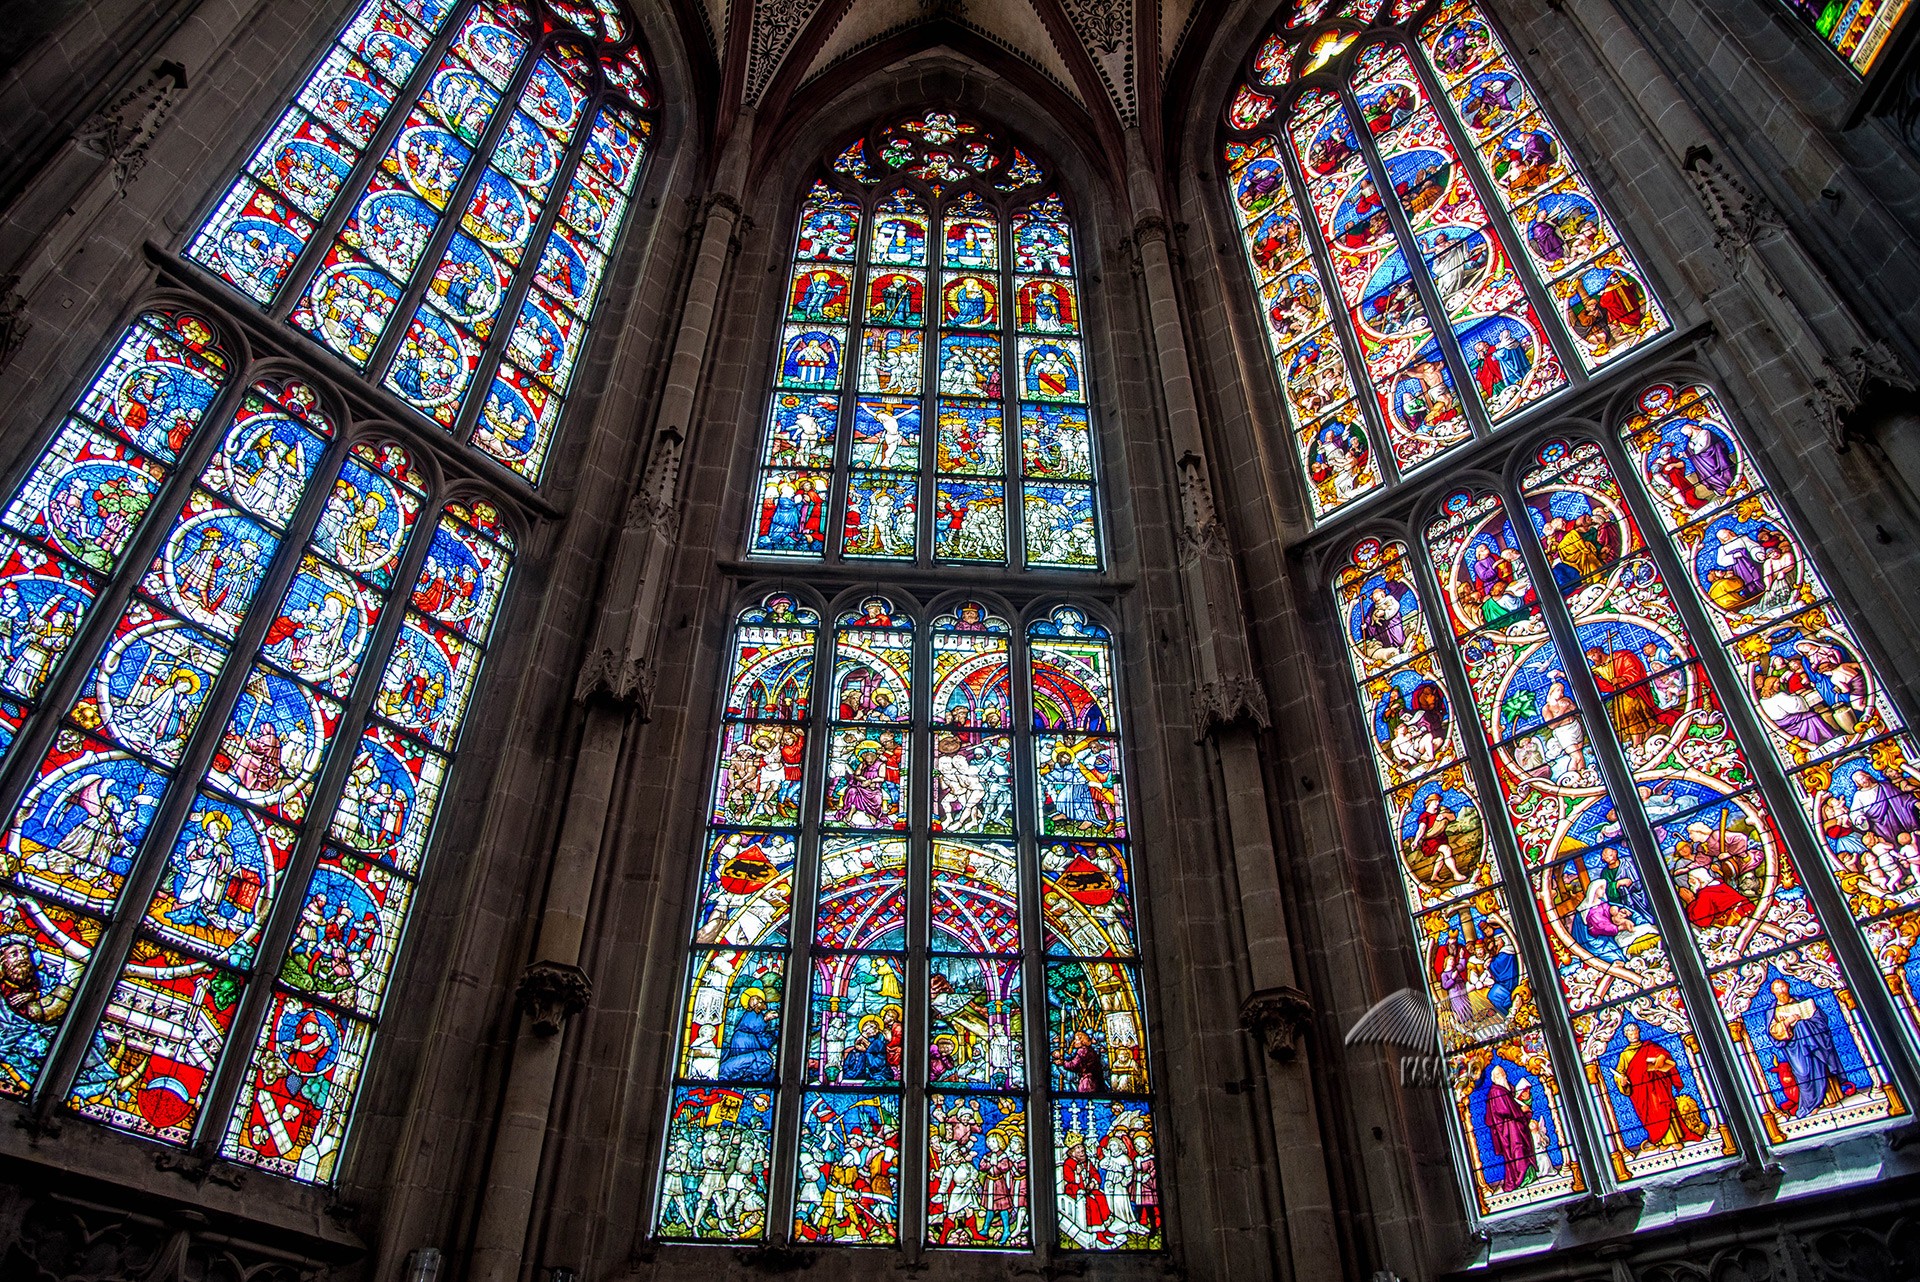 Stained-glass windows in the choir of the Bern Minster - KASADOO